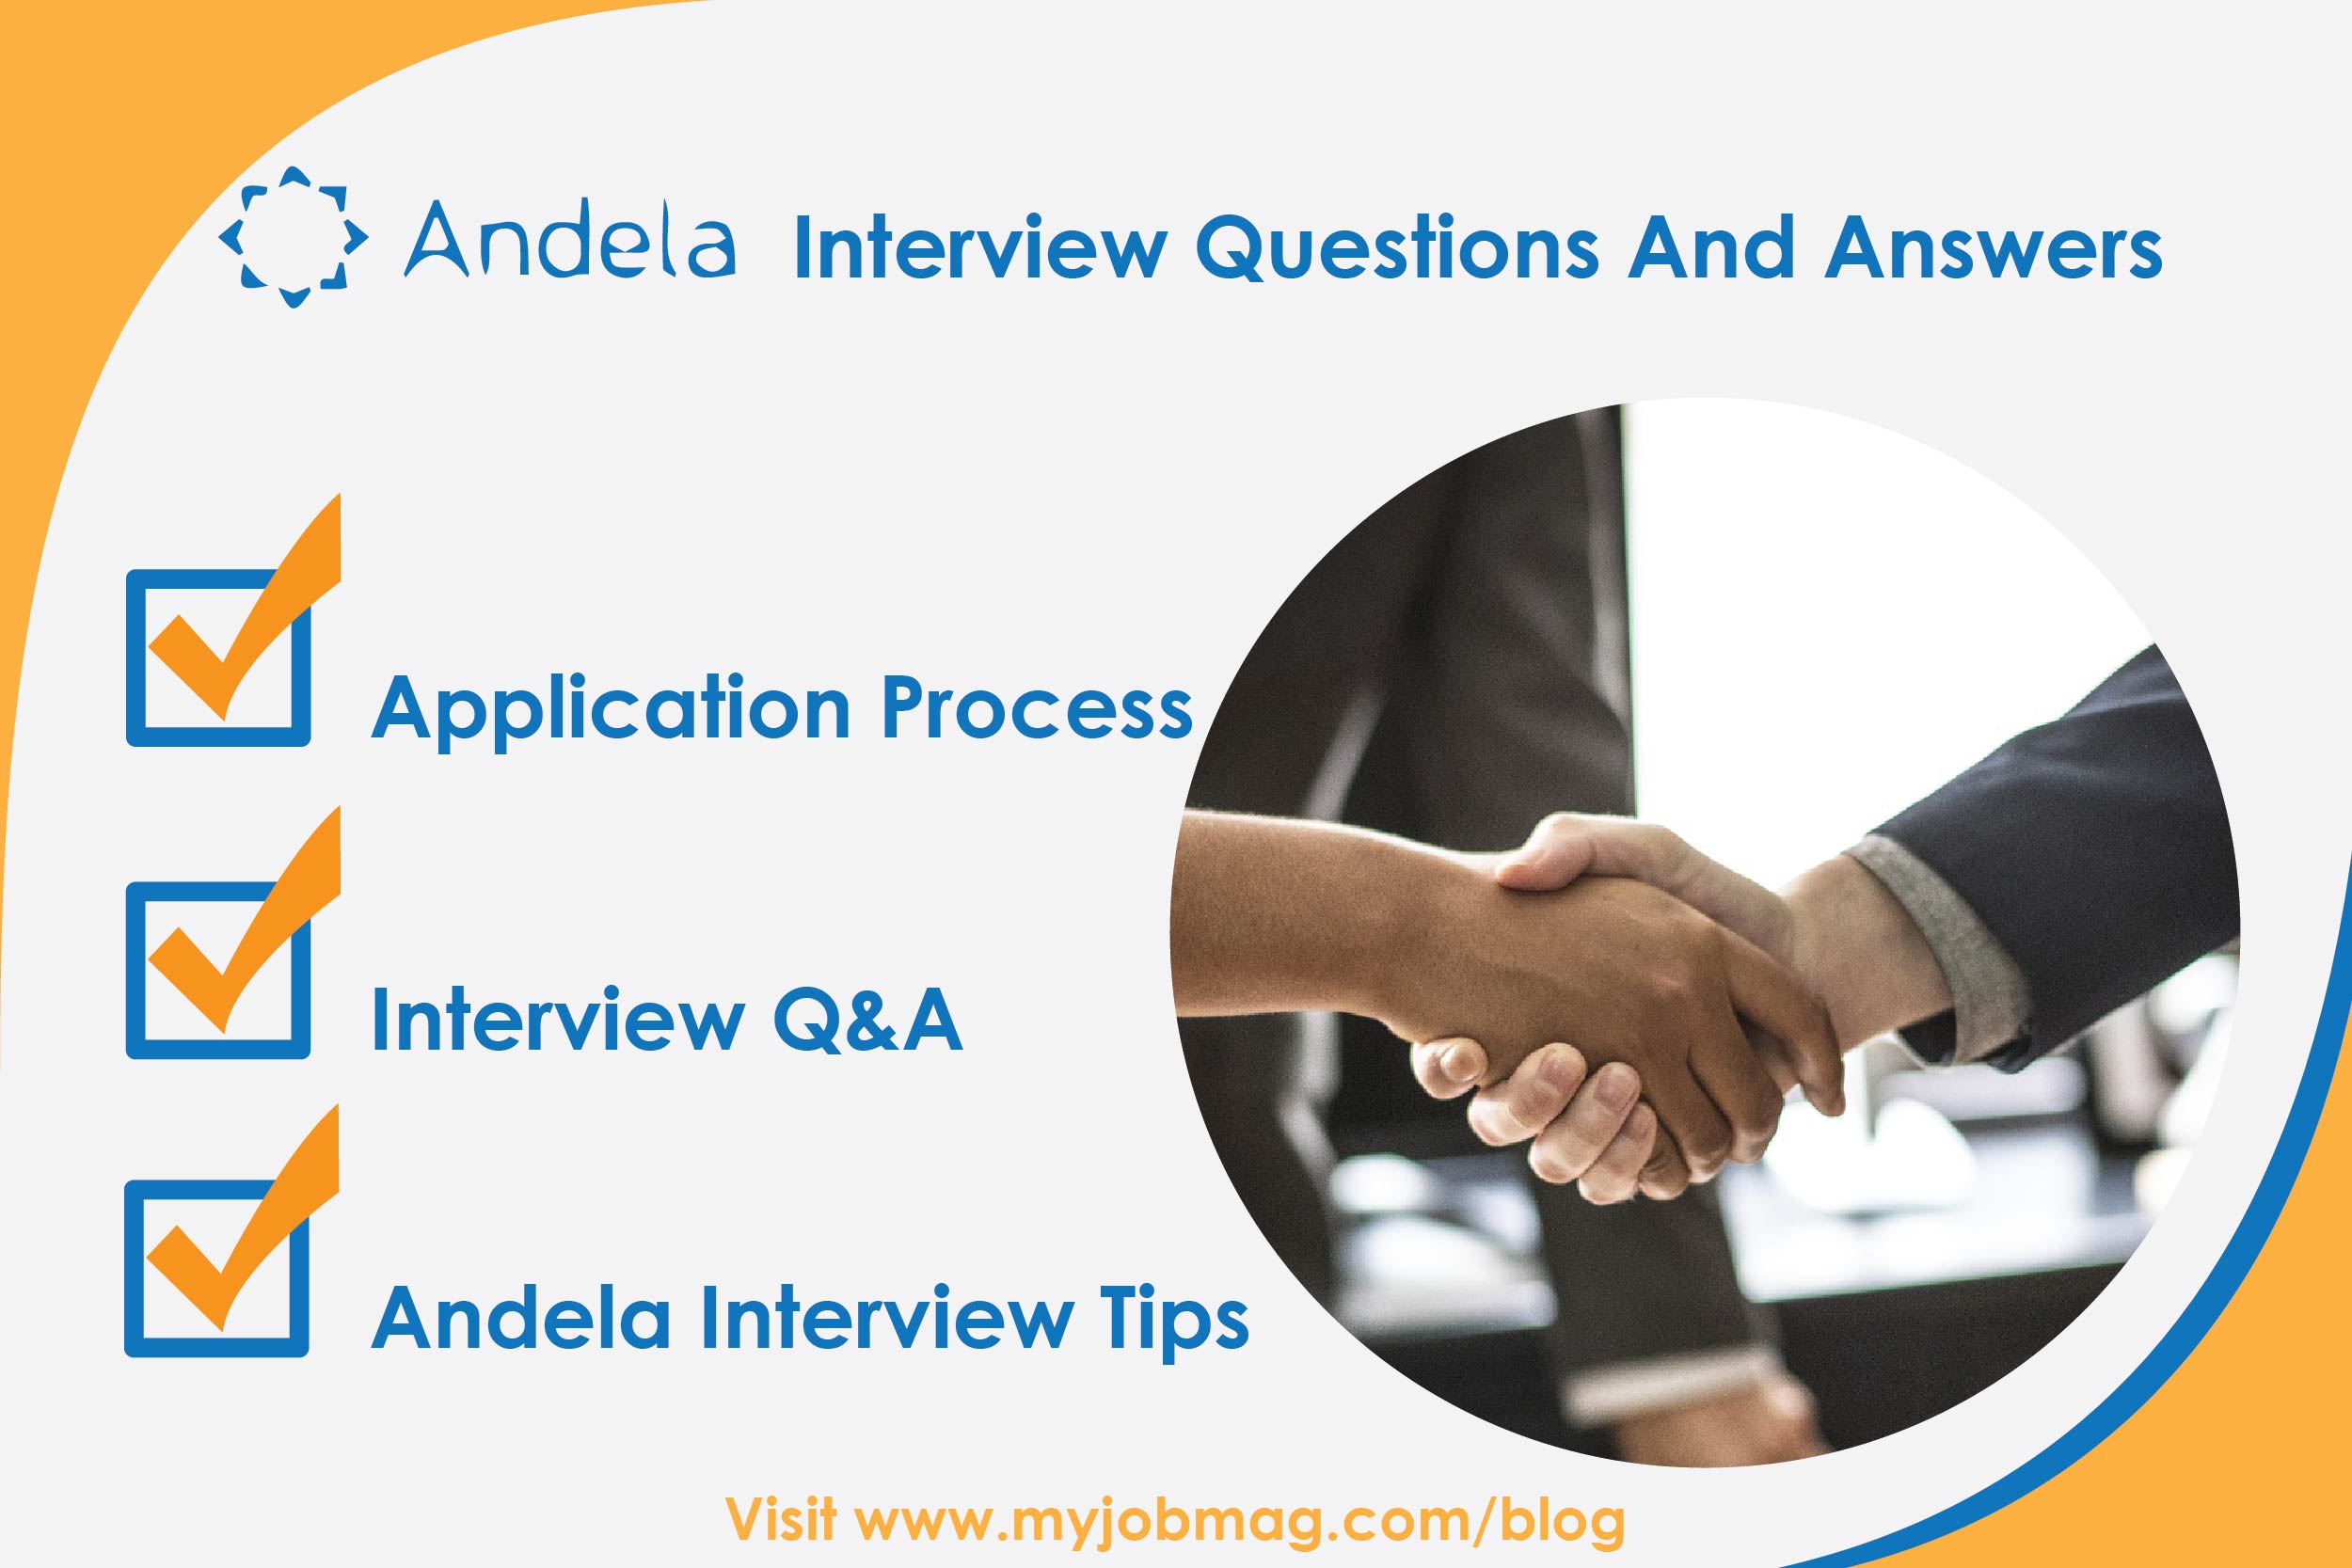 Andela Interview Process, Questions and Answers